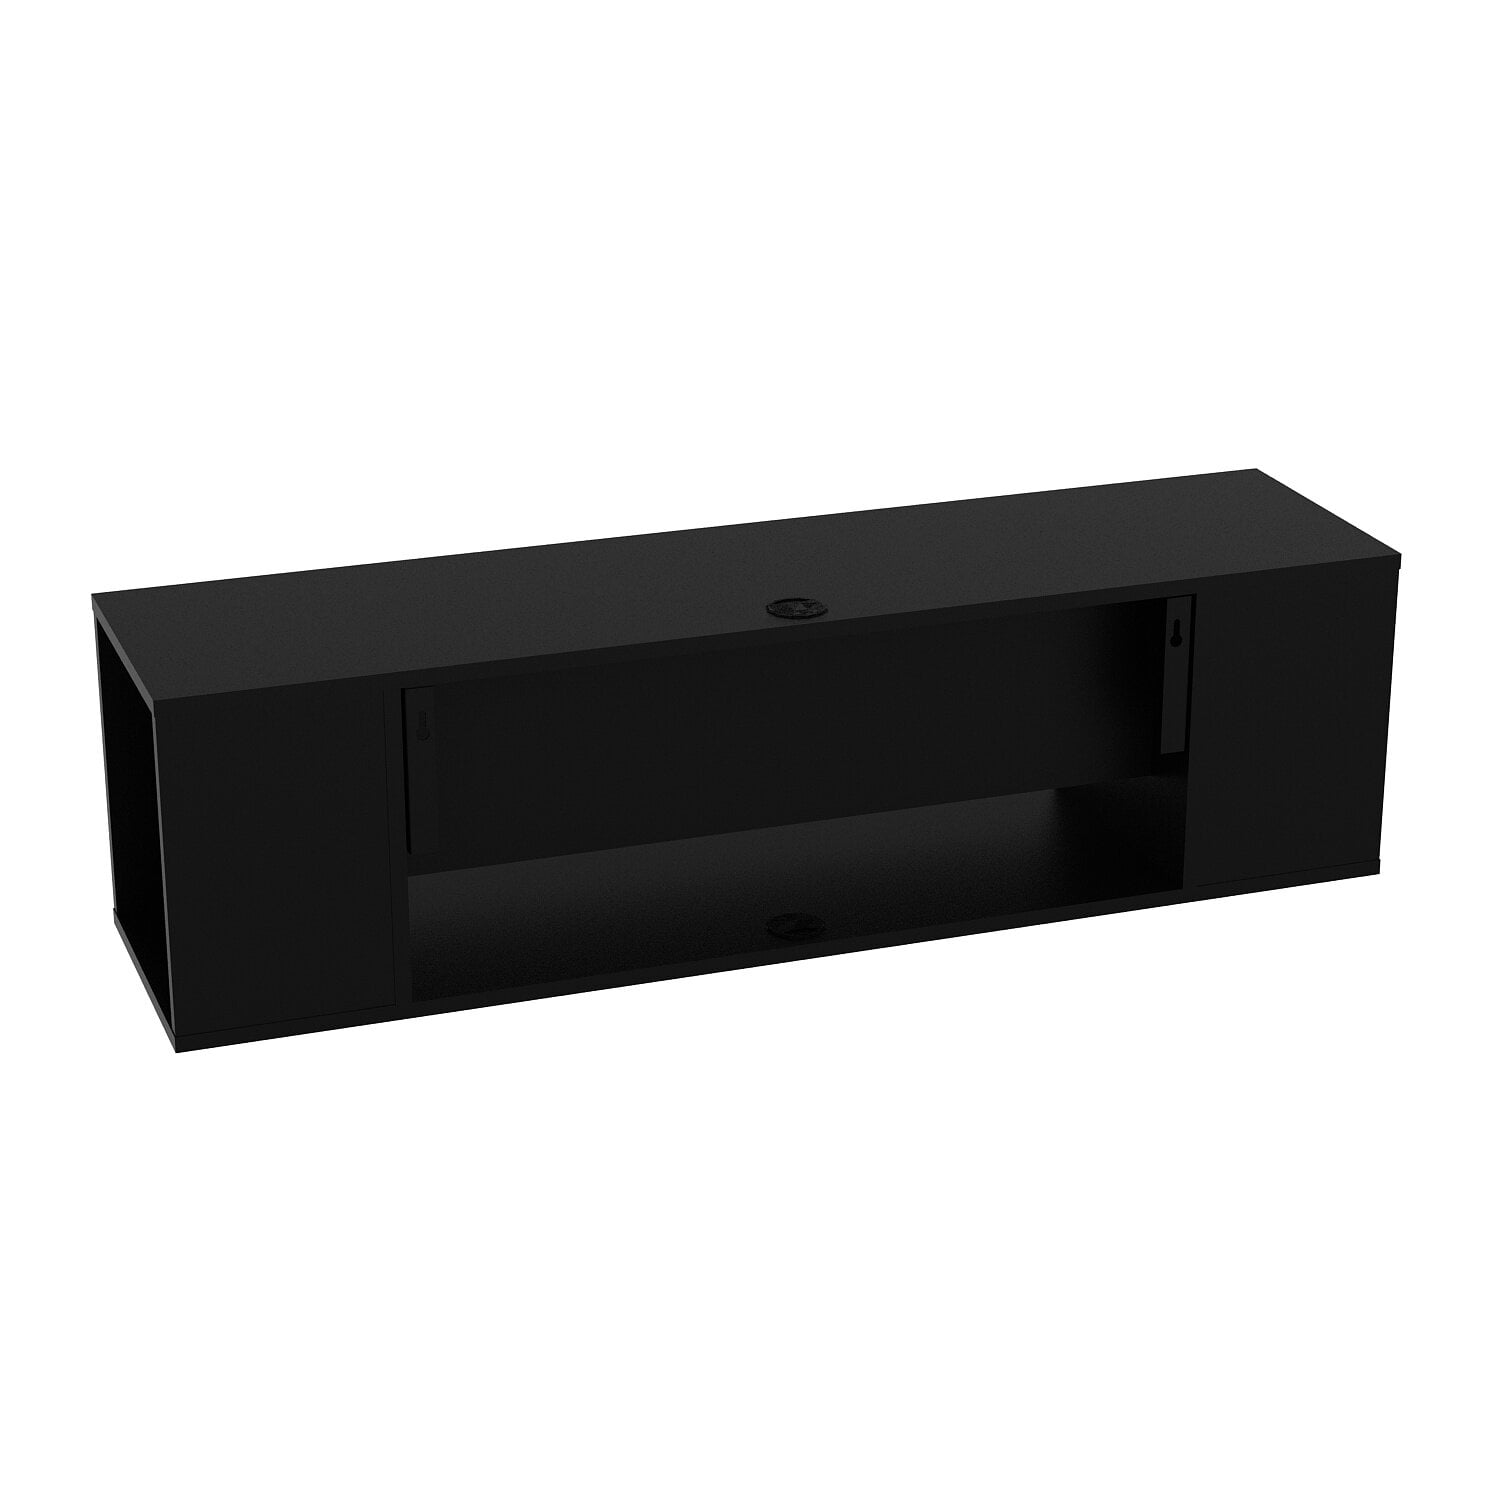 Abbie-James Floating TV Stand for TVs up to 70 